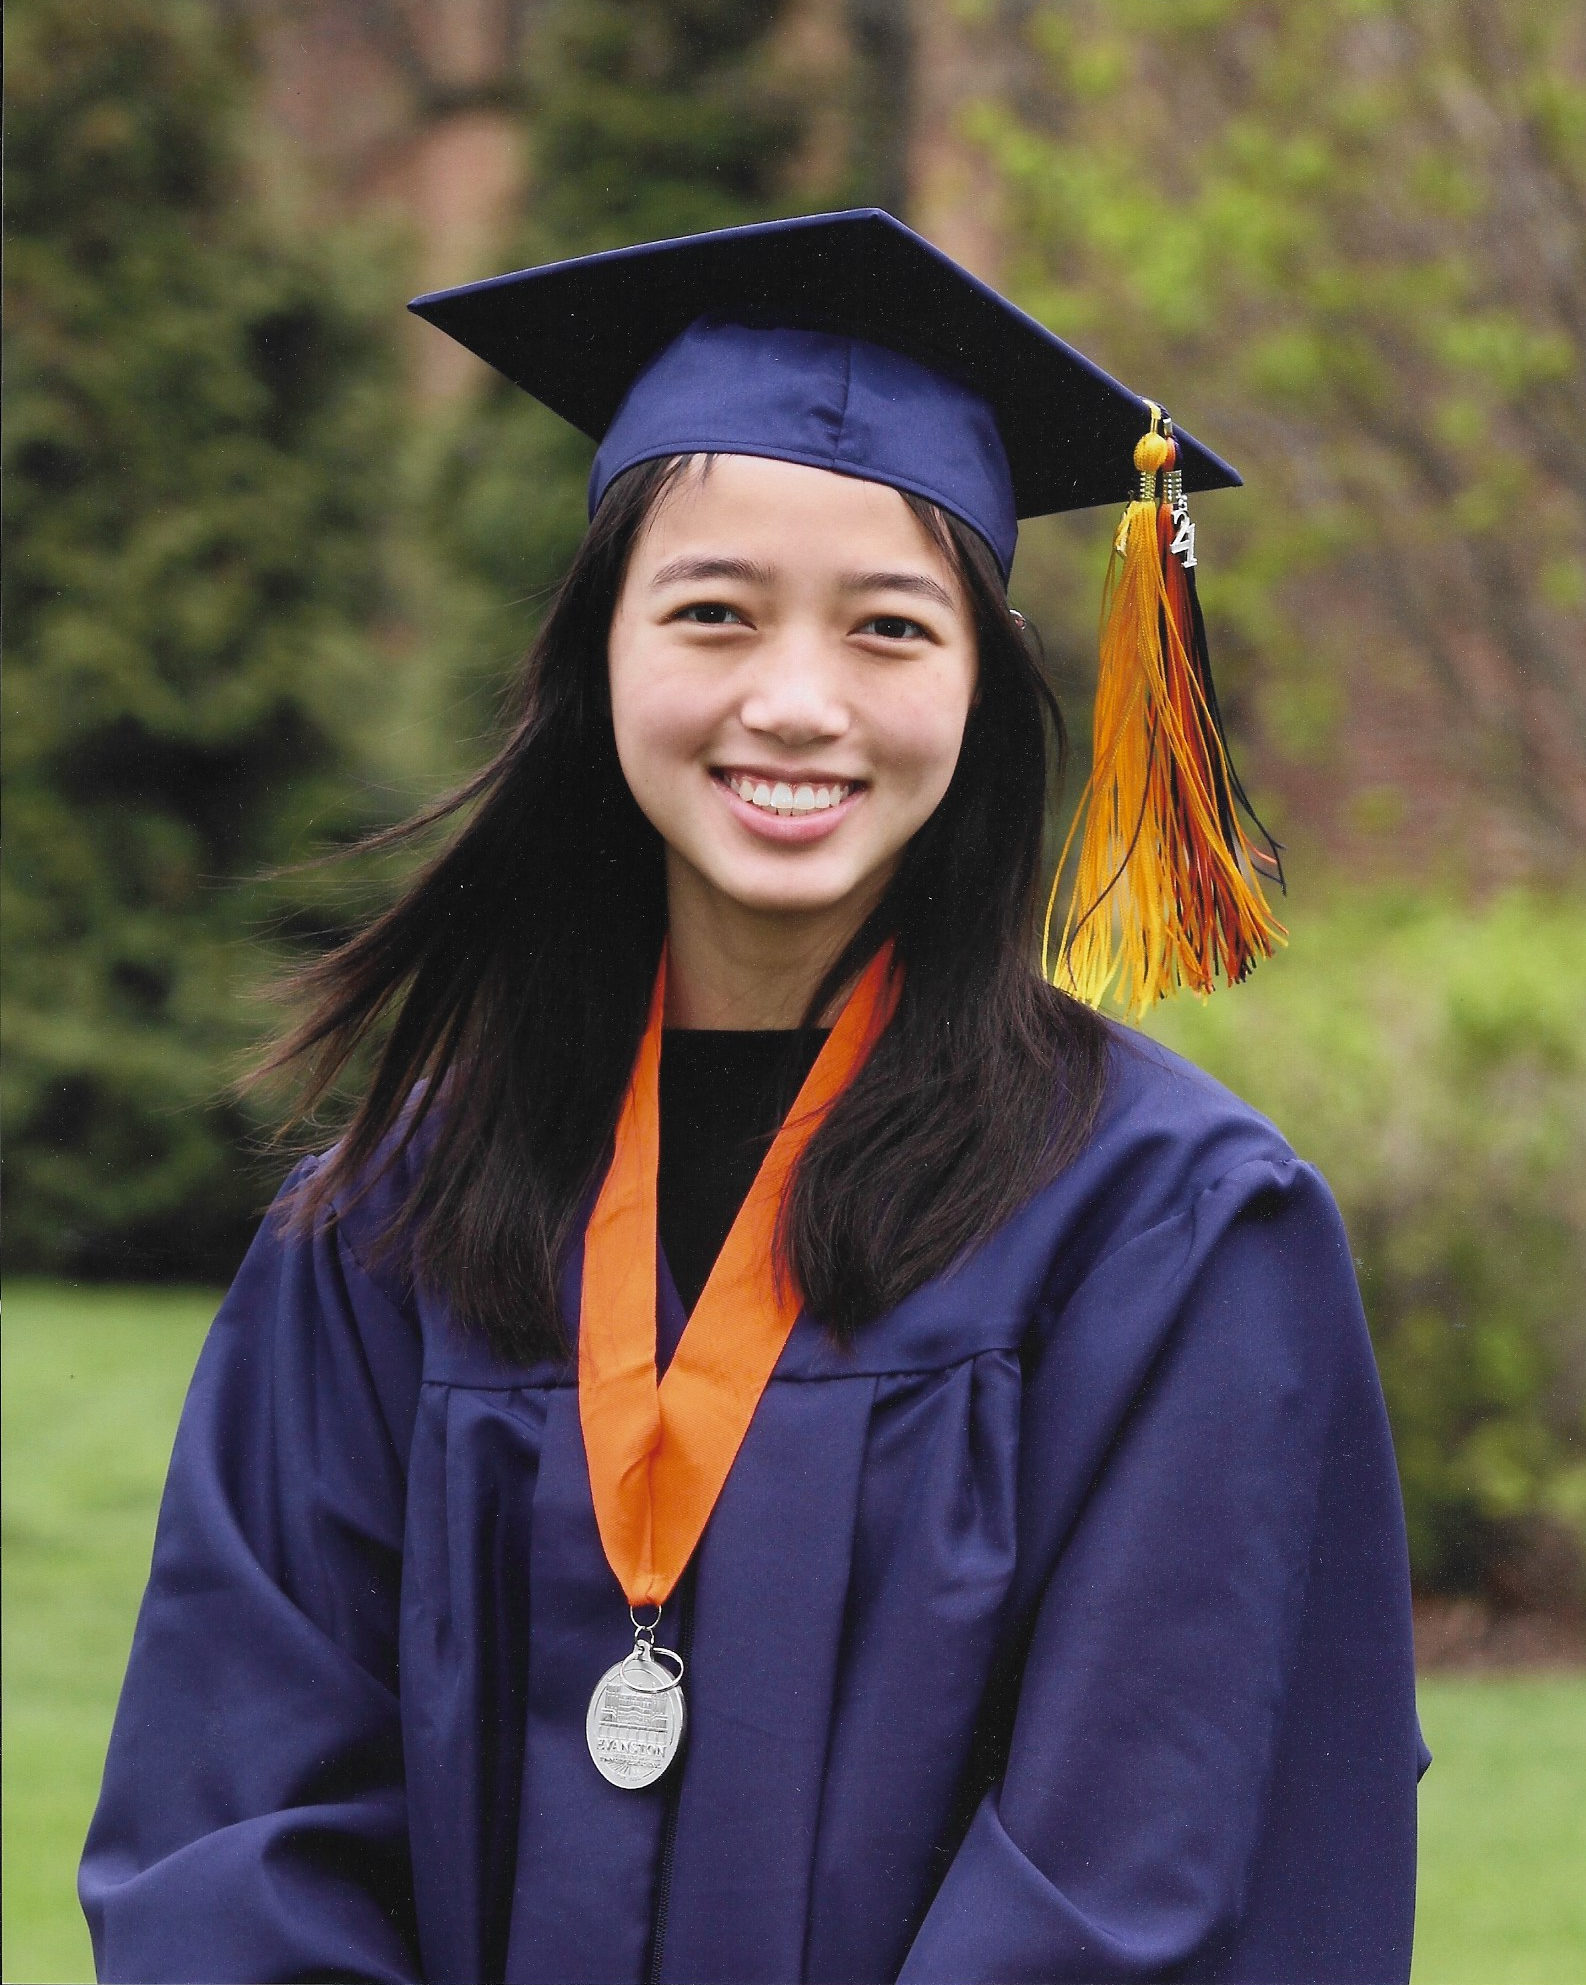 smiling girl standing in field wearing navy blue graduation cap and gown and medal with orange ribbon